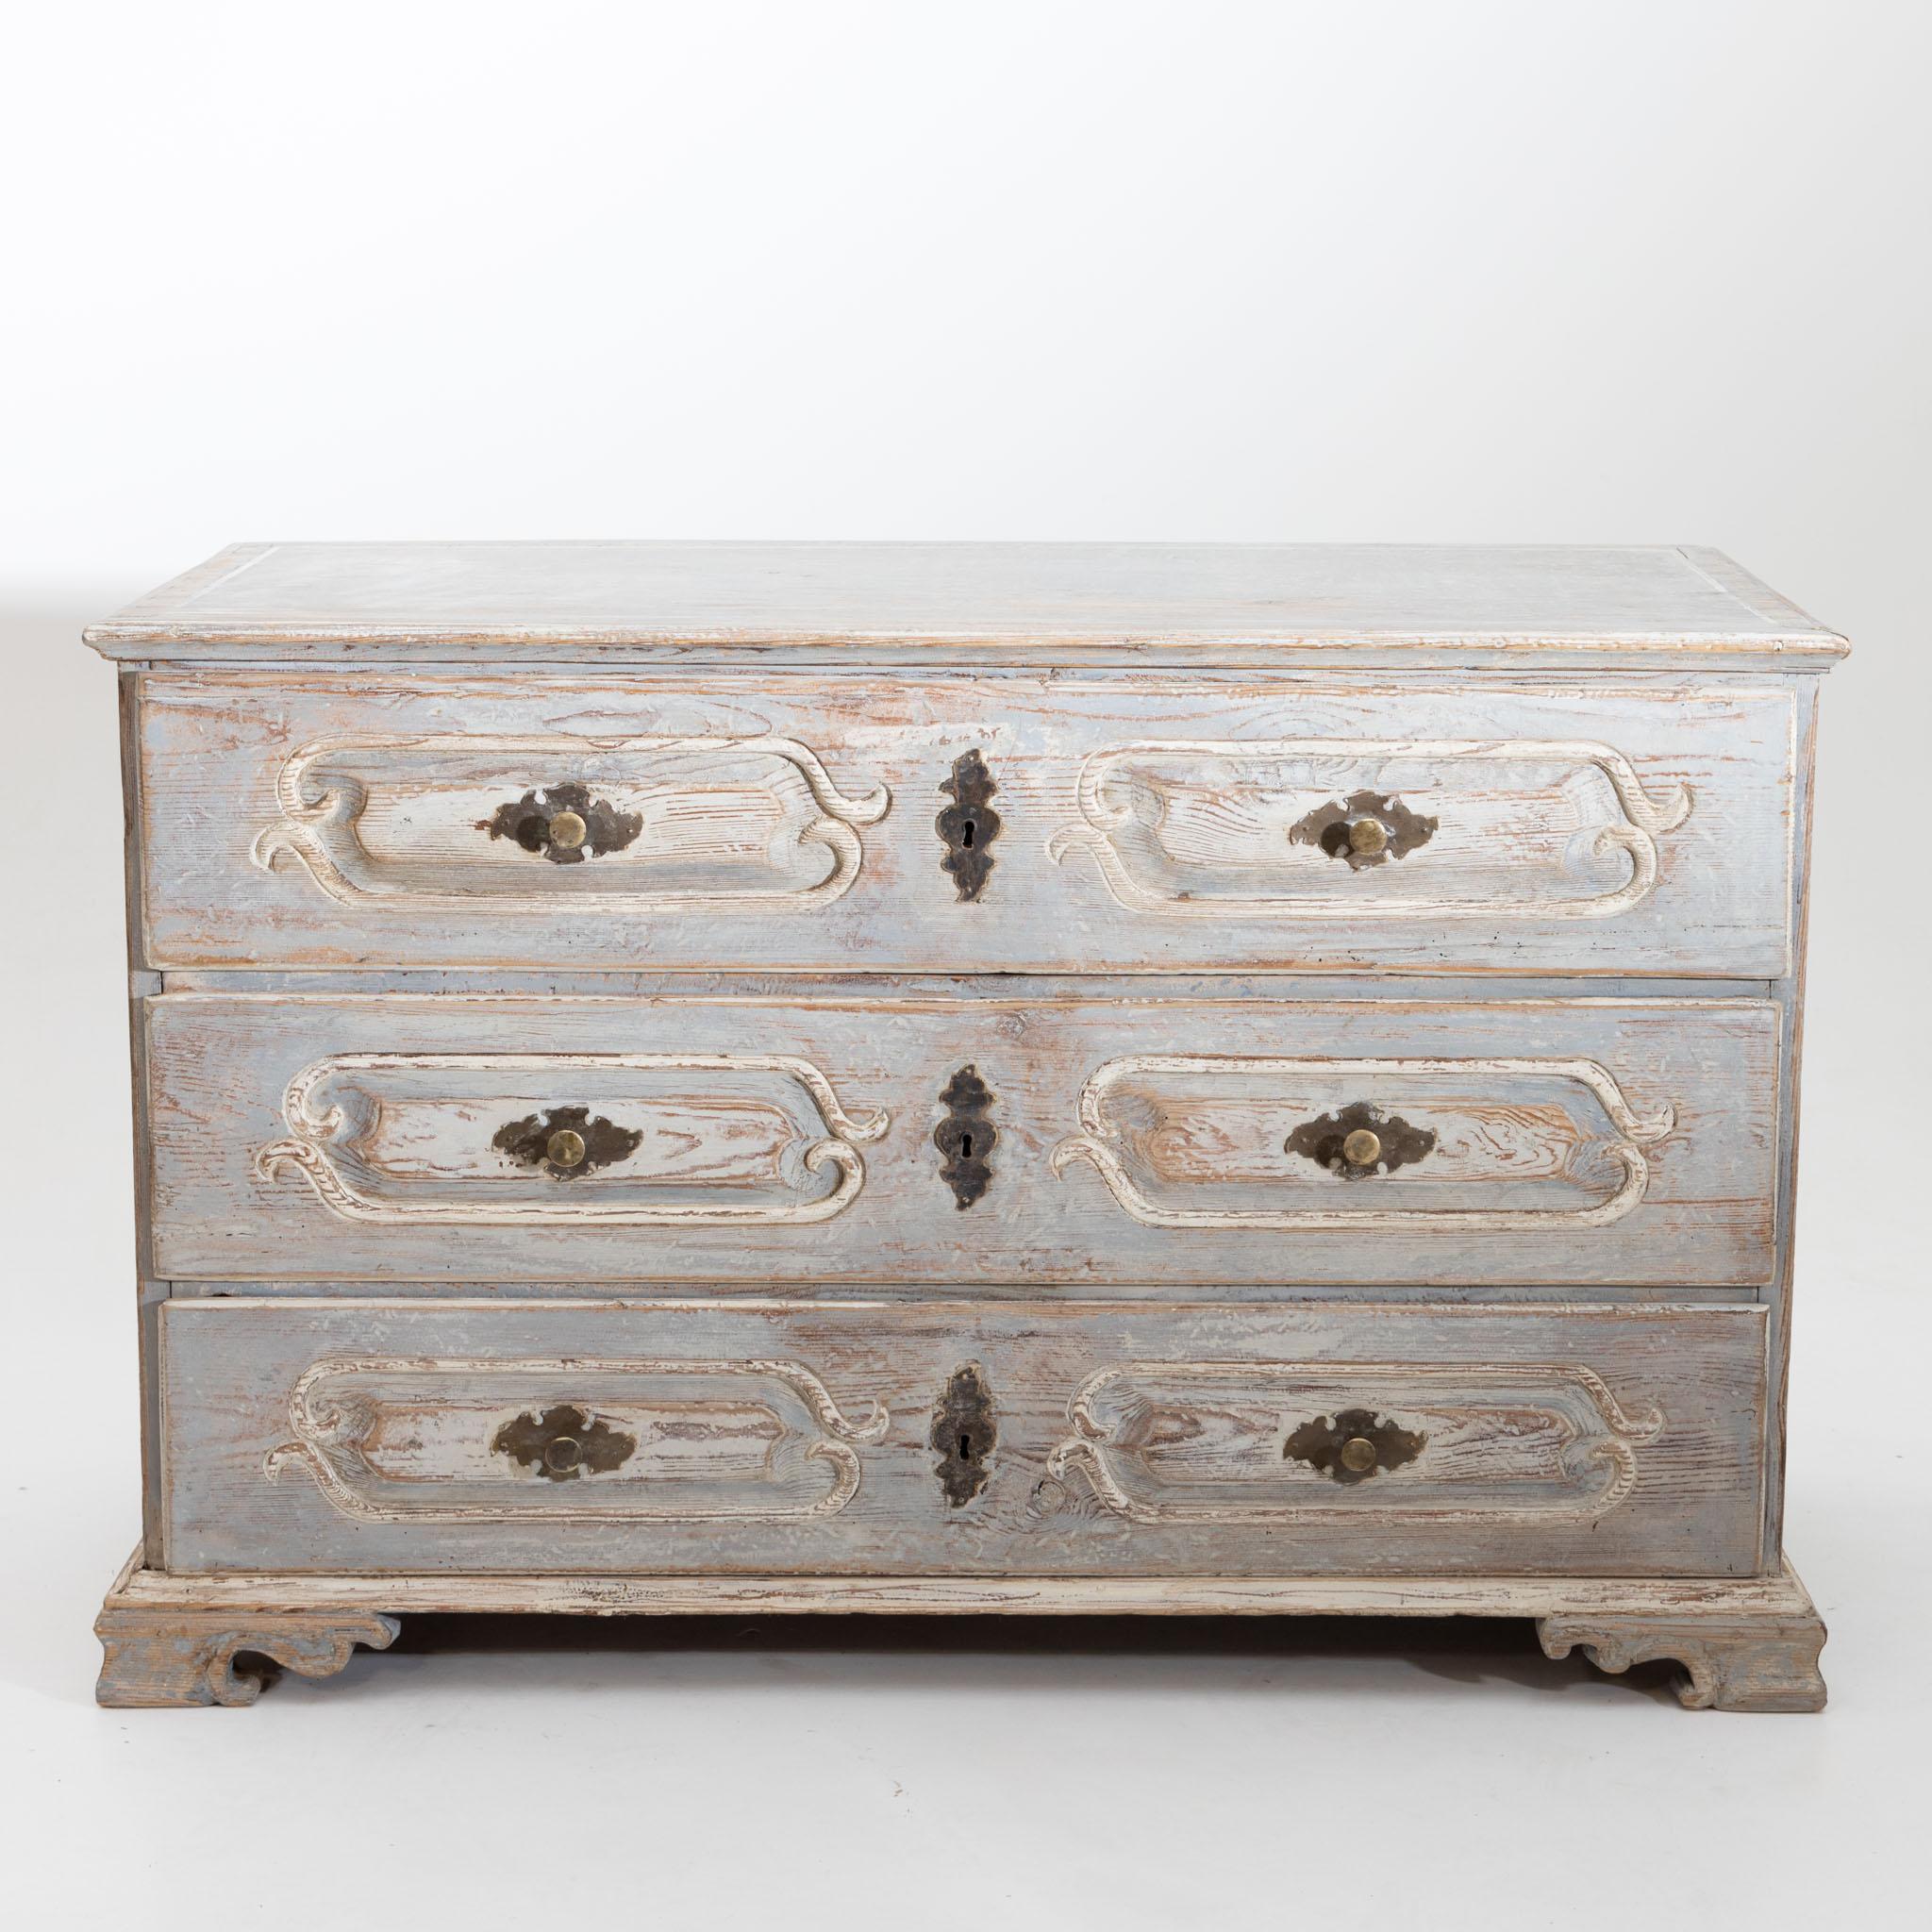 Baroque chest of drawers with three drawers and a rectilinear corpus.